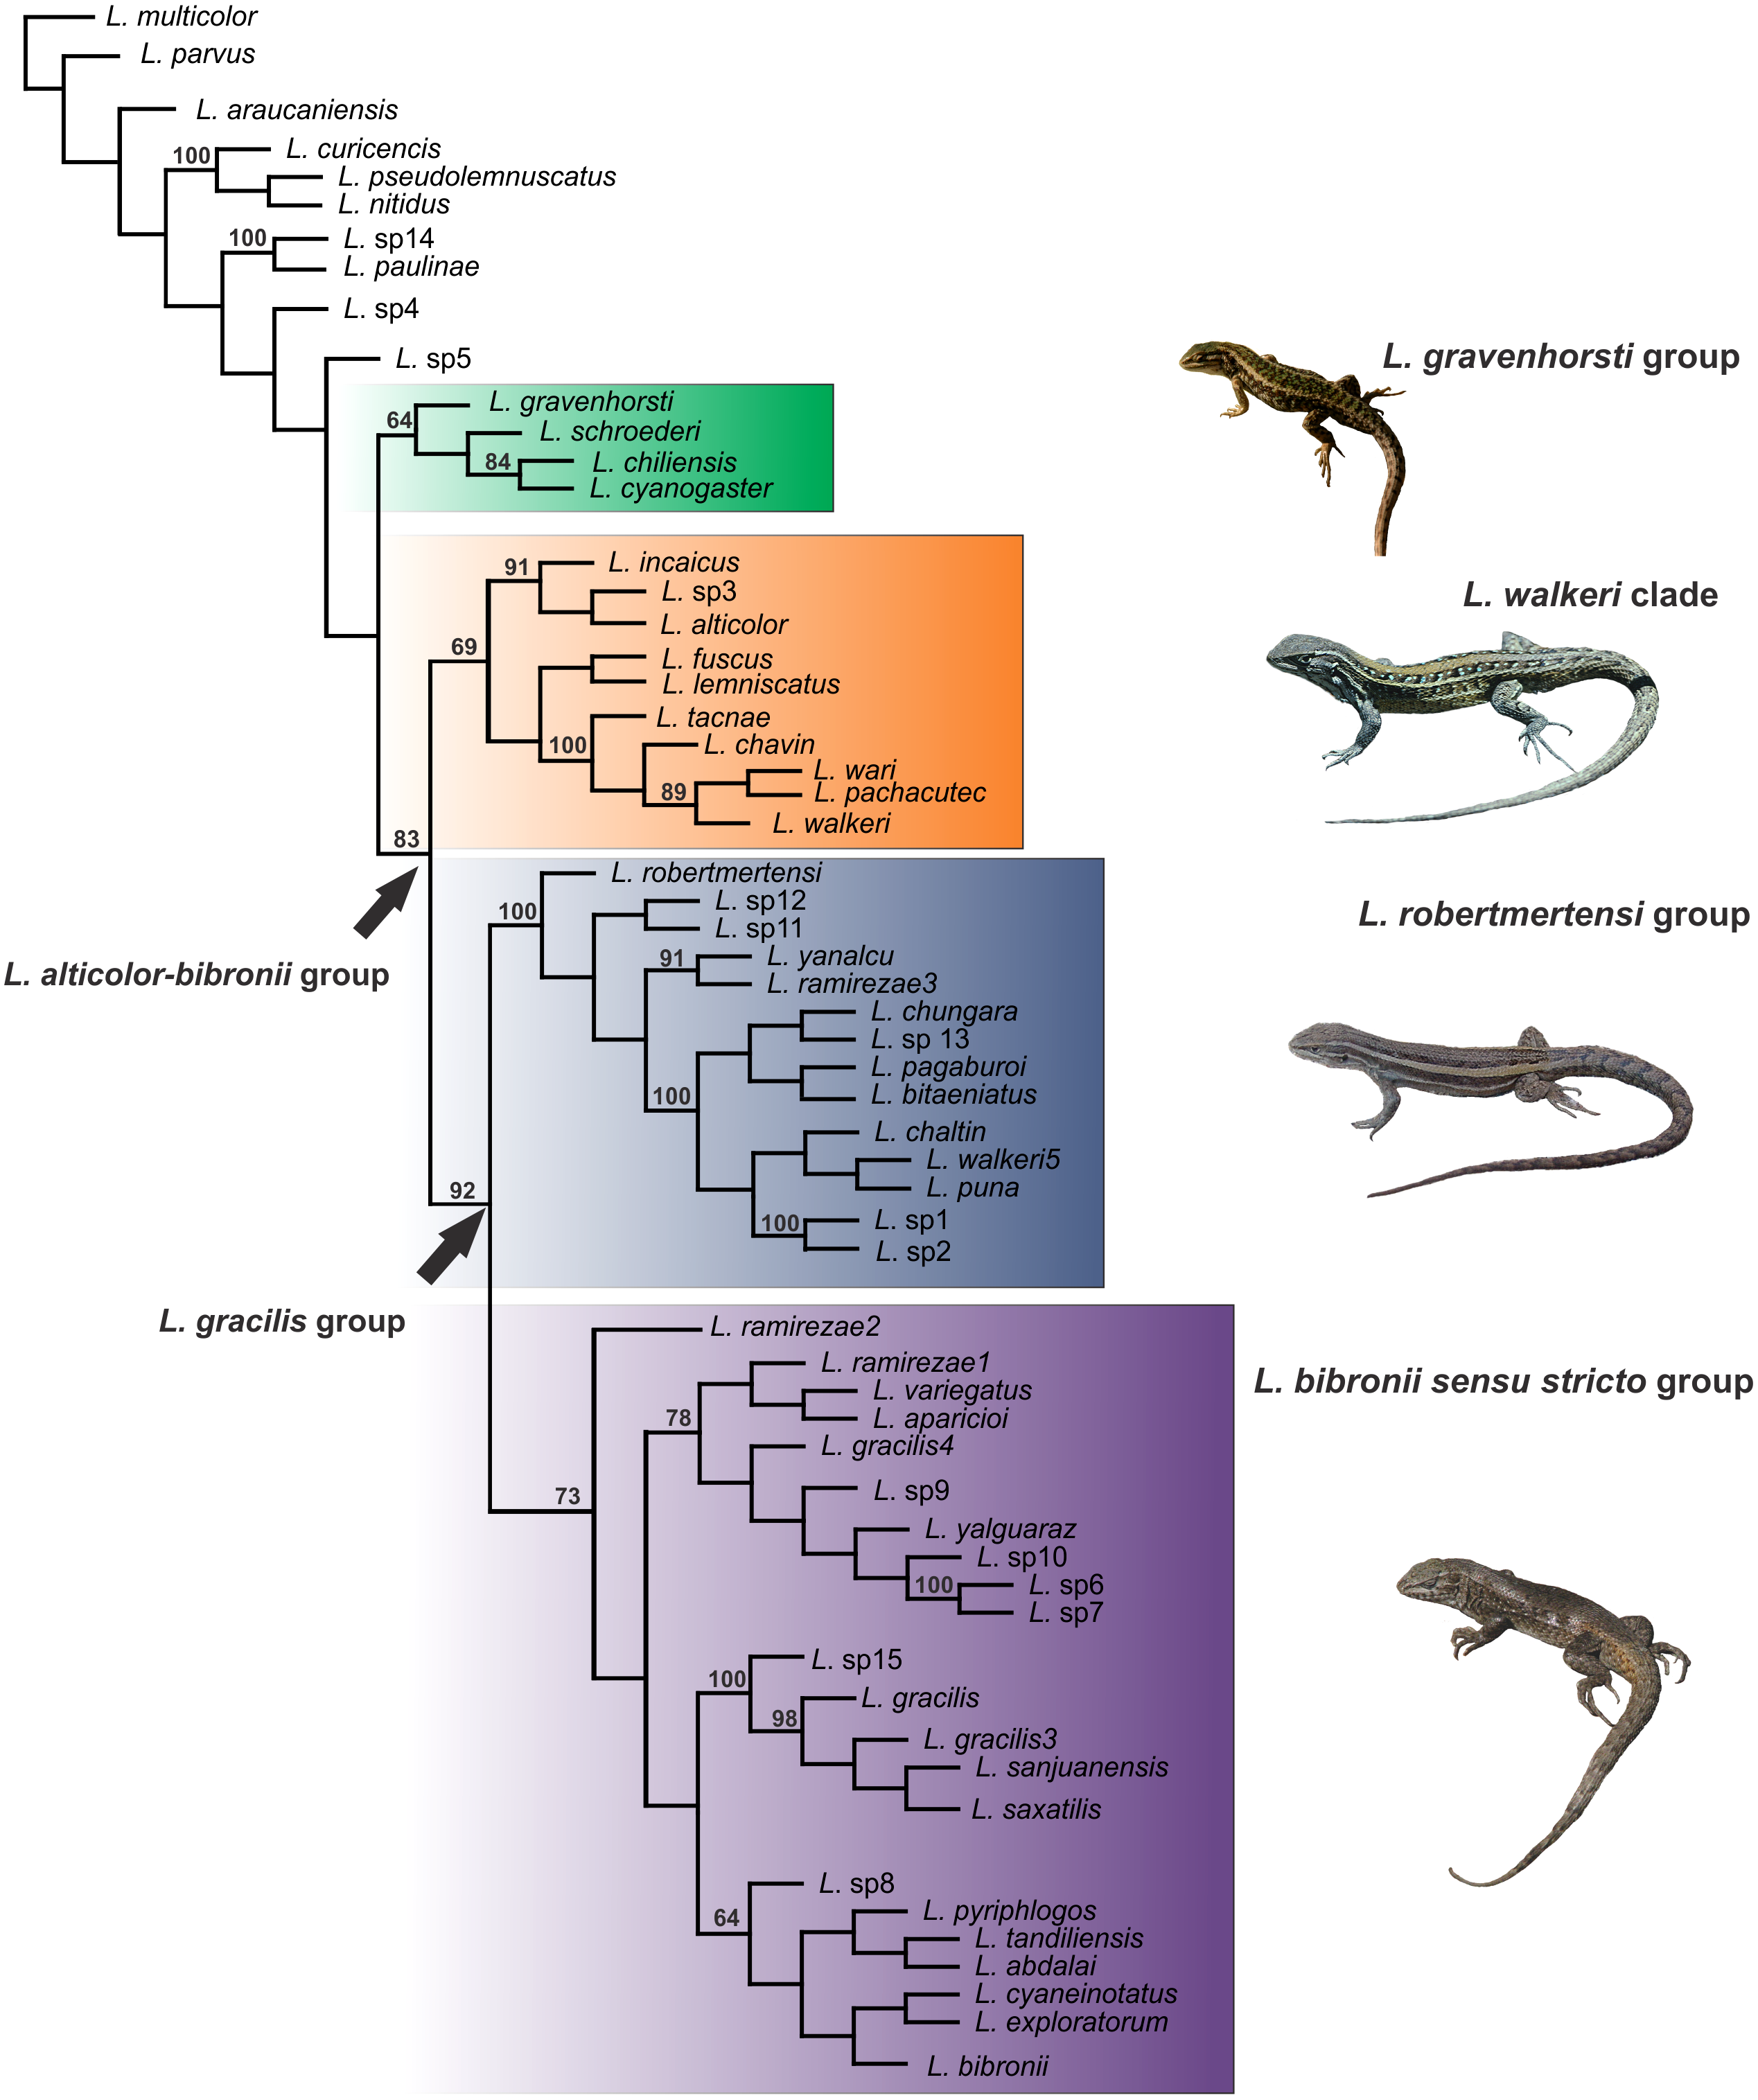 Phylogeny, time divergence, and historical biogeography of the